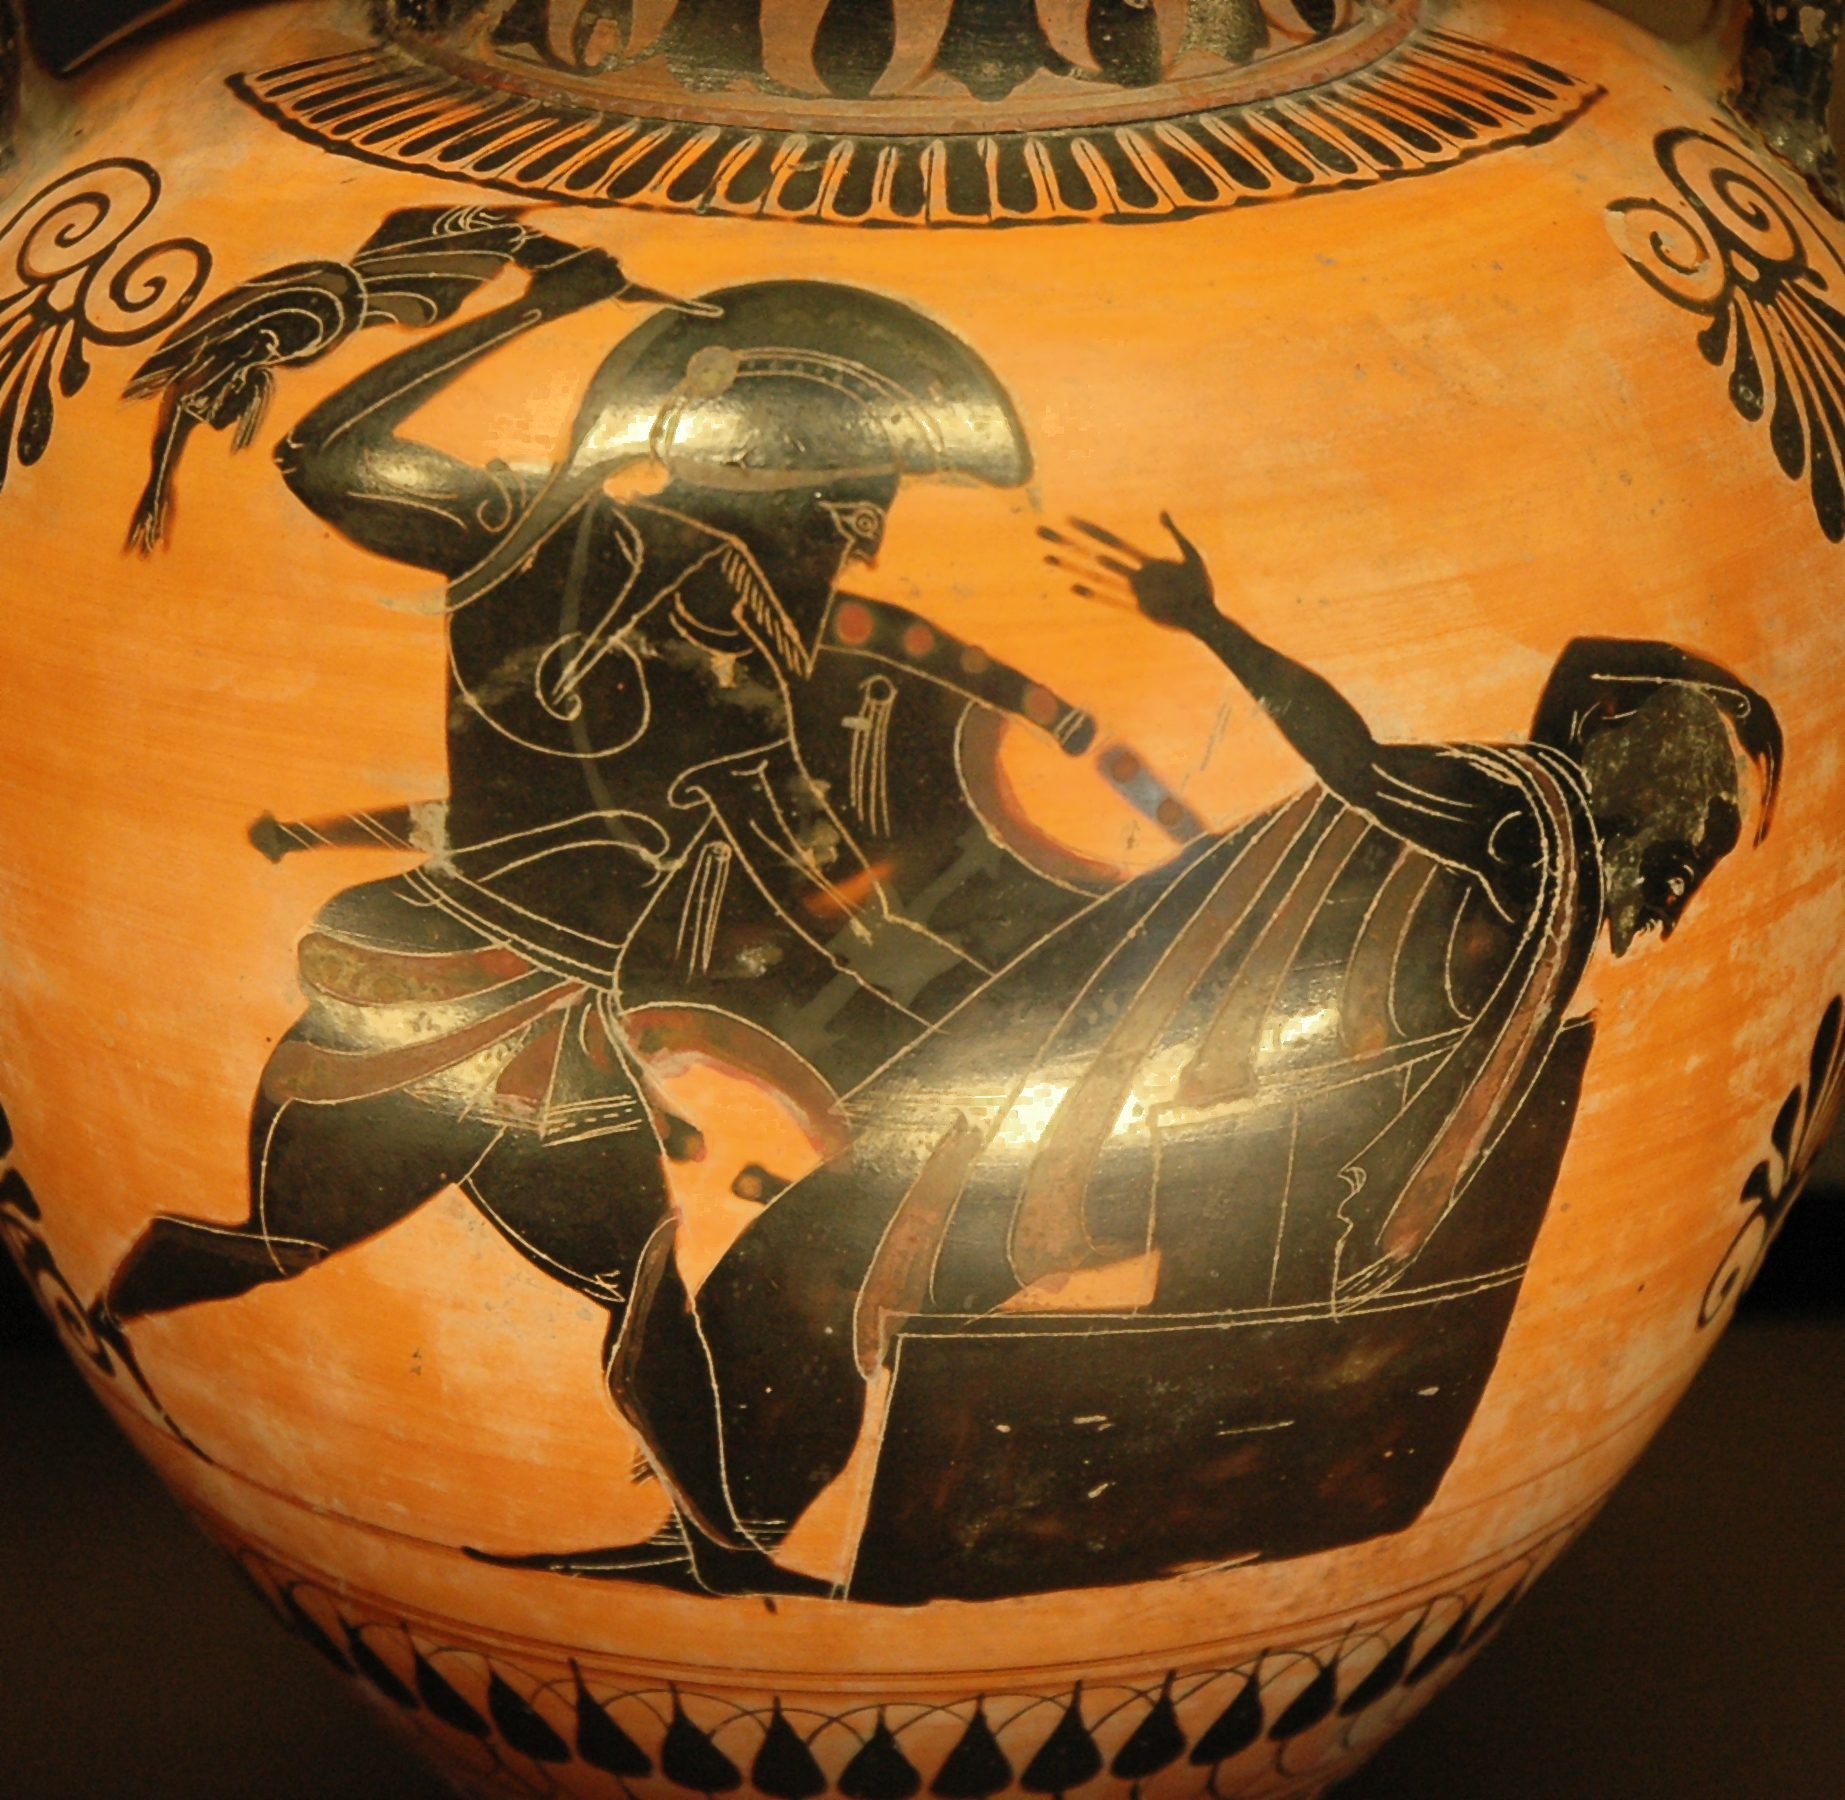 Neoptolemus, wearing a plumed helm and armour and carrying a shield, stands over Priam. Priam, wearing a himation and no armour, stumbles backwards onto an altar with an arm thrown up over his head. Neoptolemus wields a small child like a weapon to attack Priam.